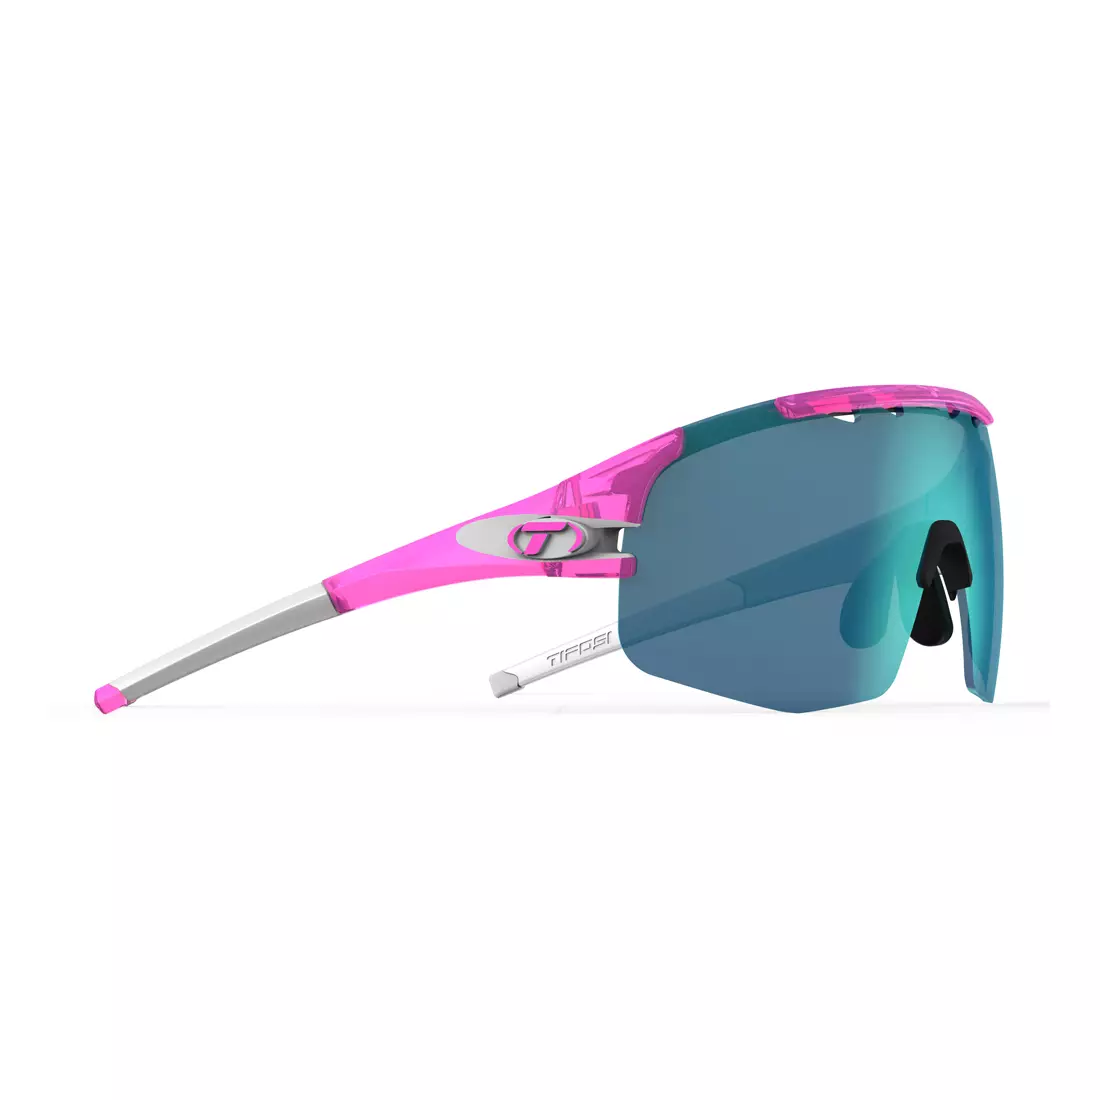 TIFOSI glasses with interchangeable lenses SLEDGE LITE CLARION (Clarion Blue, AC Red, Clear) crystal pink TFI-1670104522